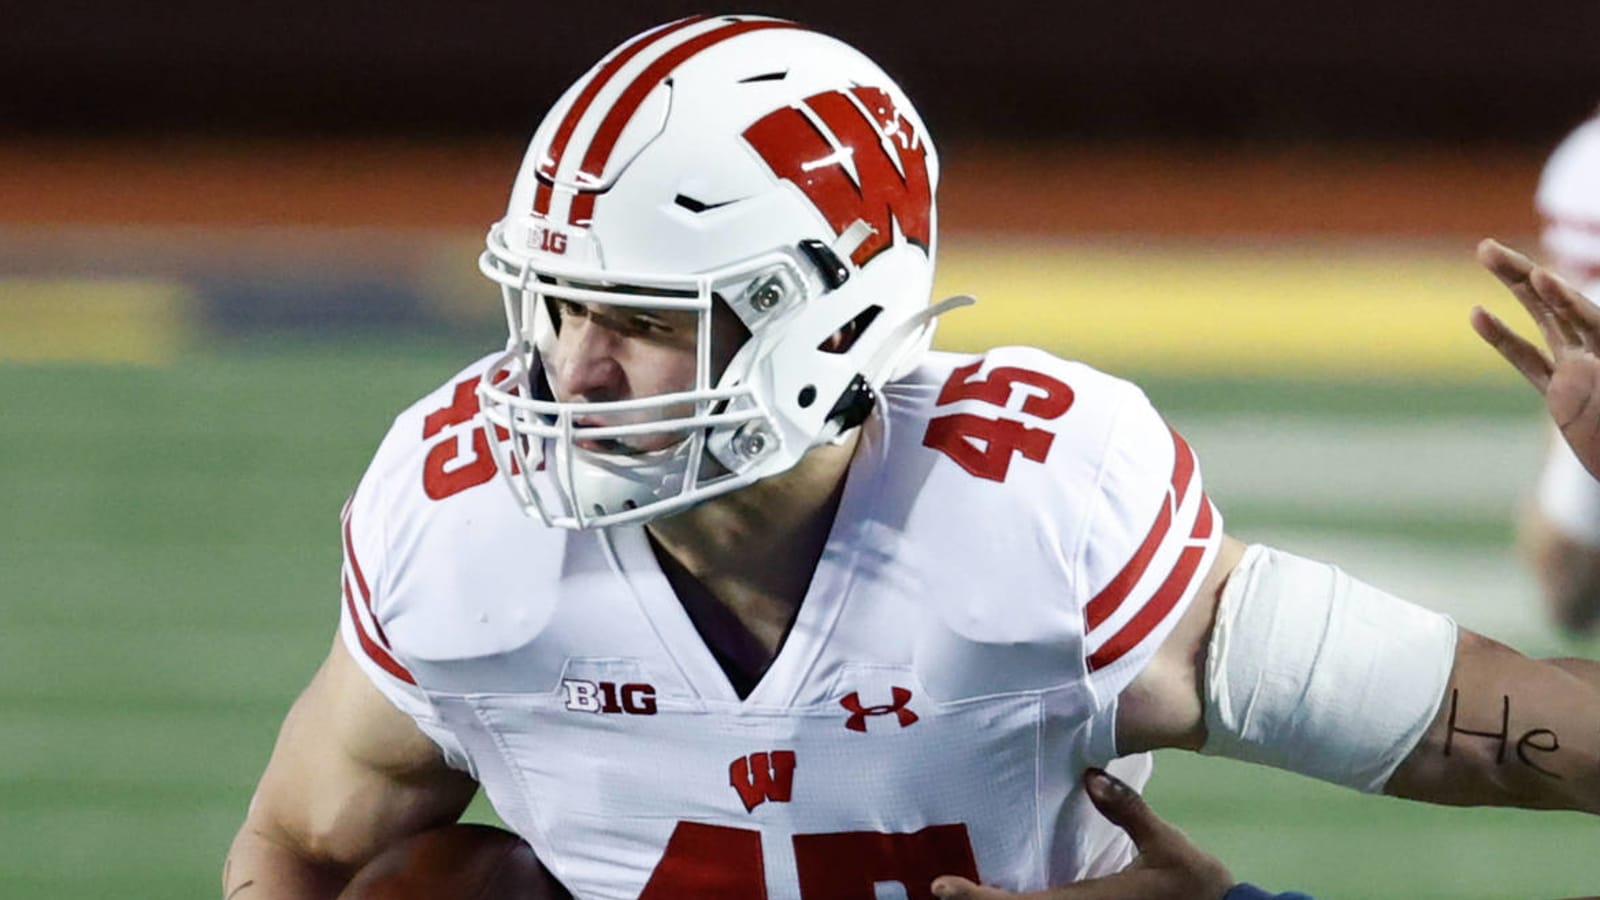 Wisconsin LB Leo Chenal tests positive for COVID-19, will miss two games